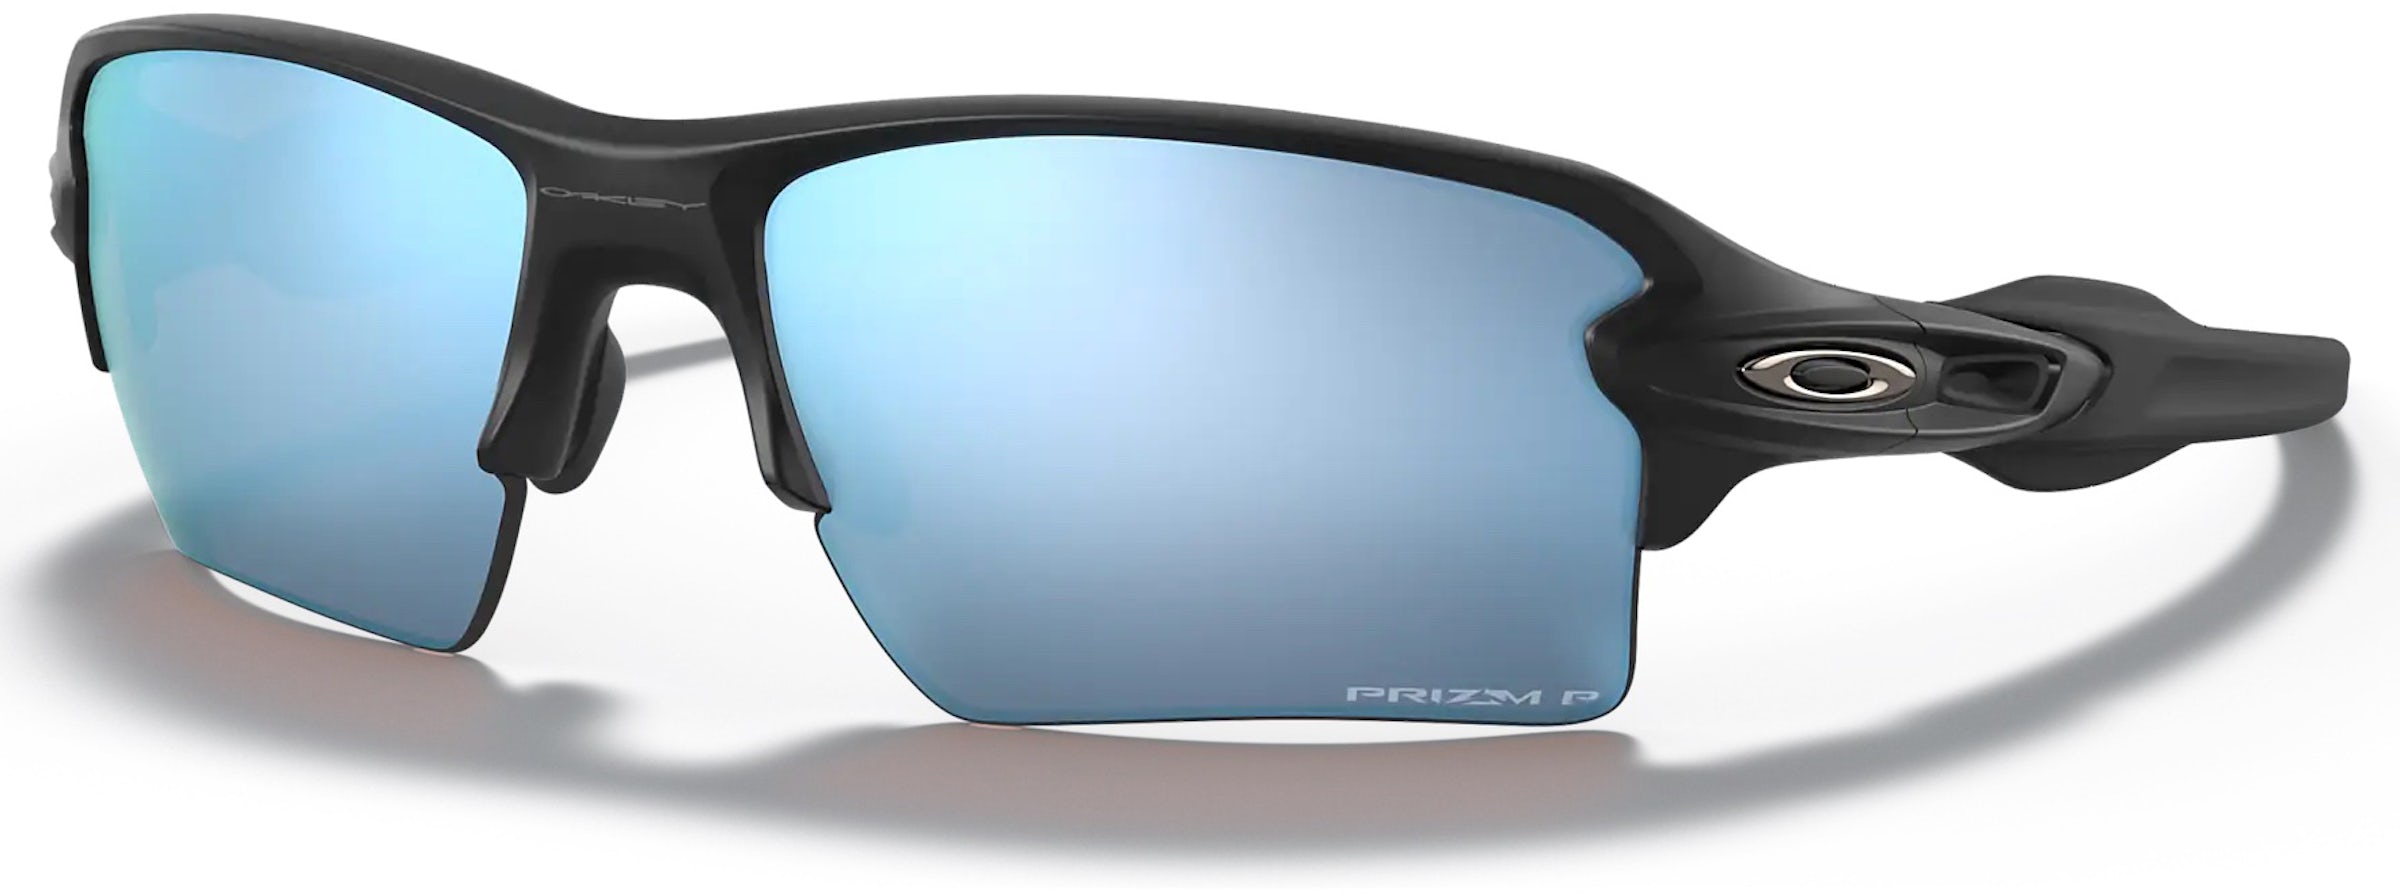 Oakley Prizm React - The future of goggle technology